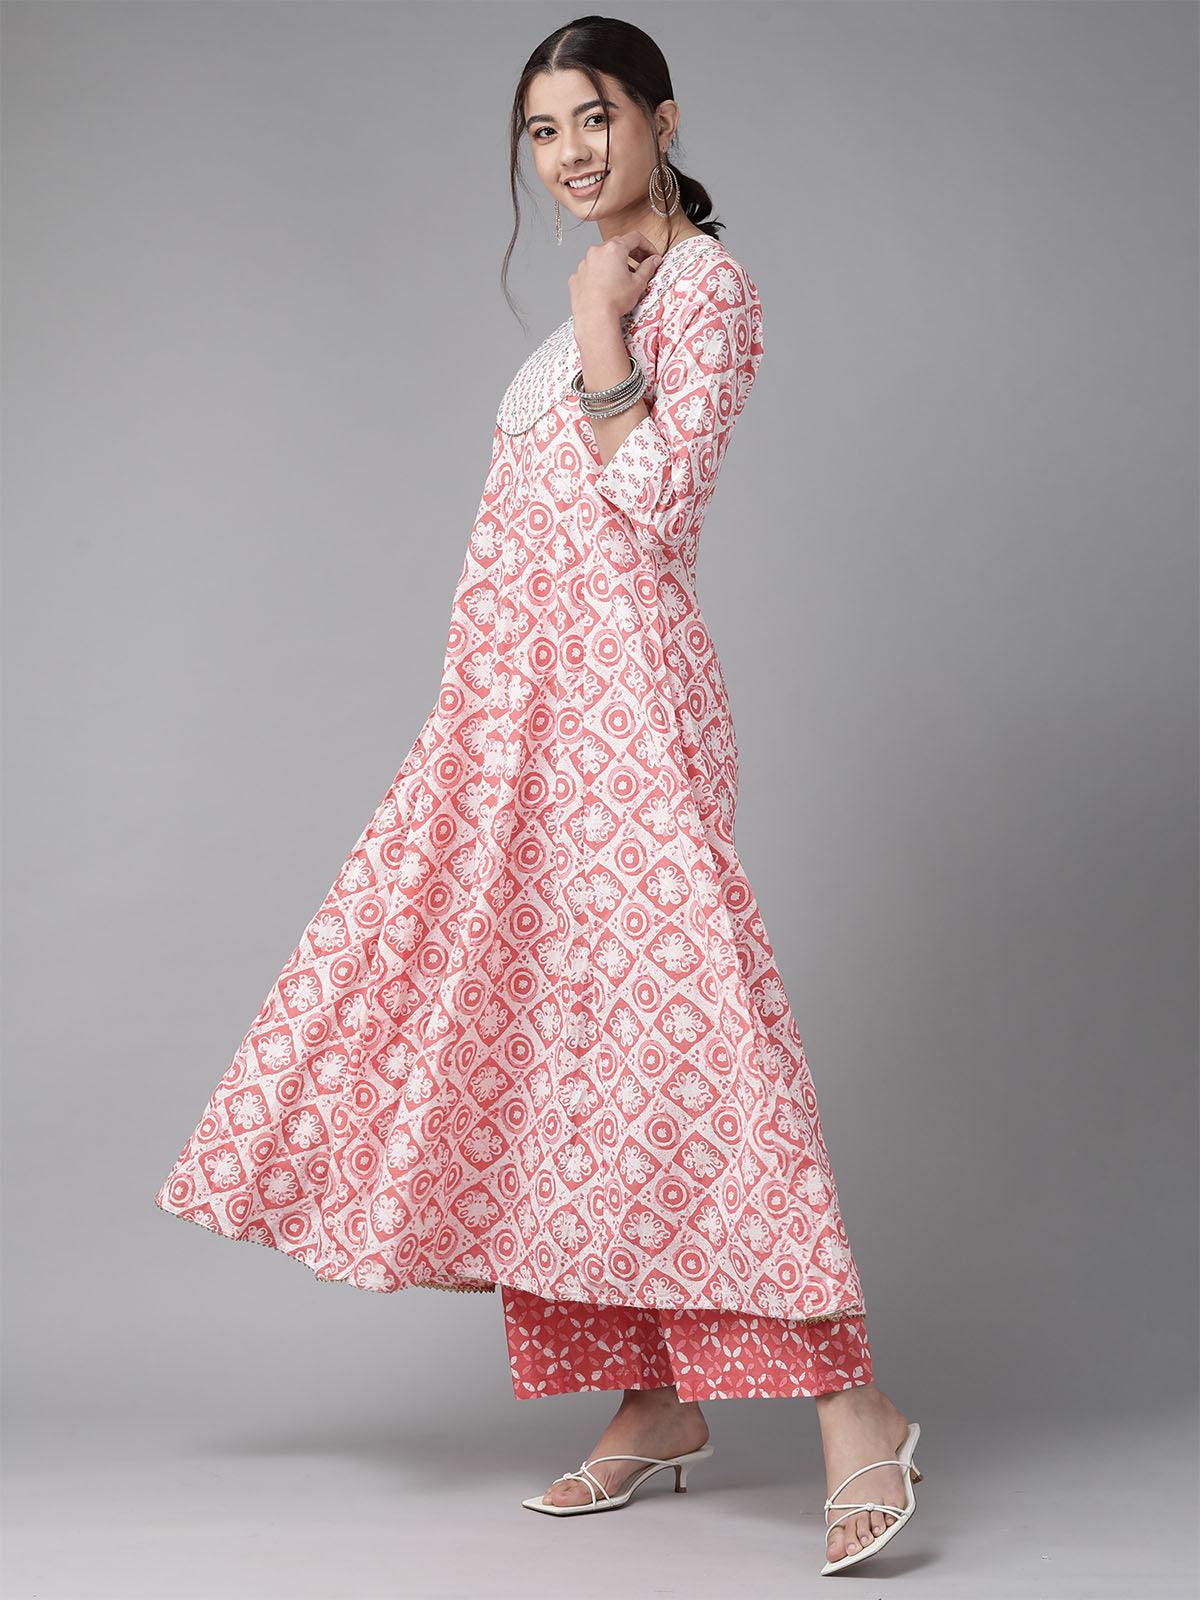 Pink Embroidered A-line Kurta Trouser With Dupatta Set - Odette